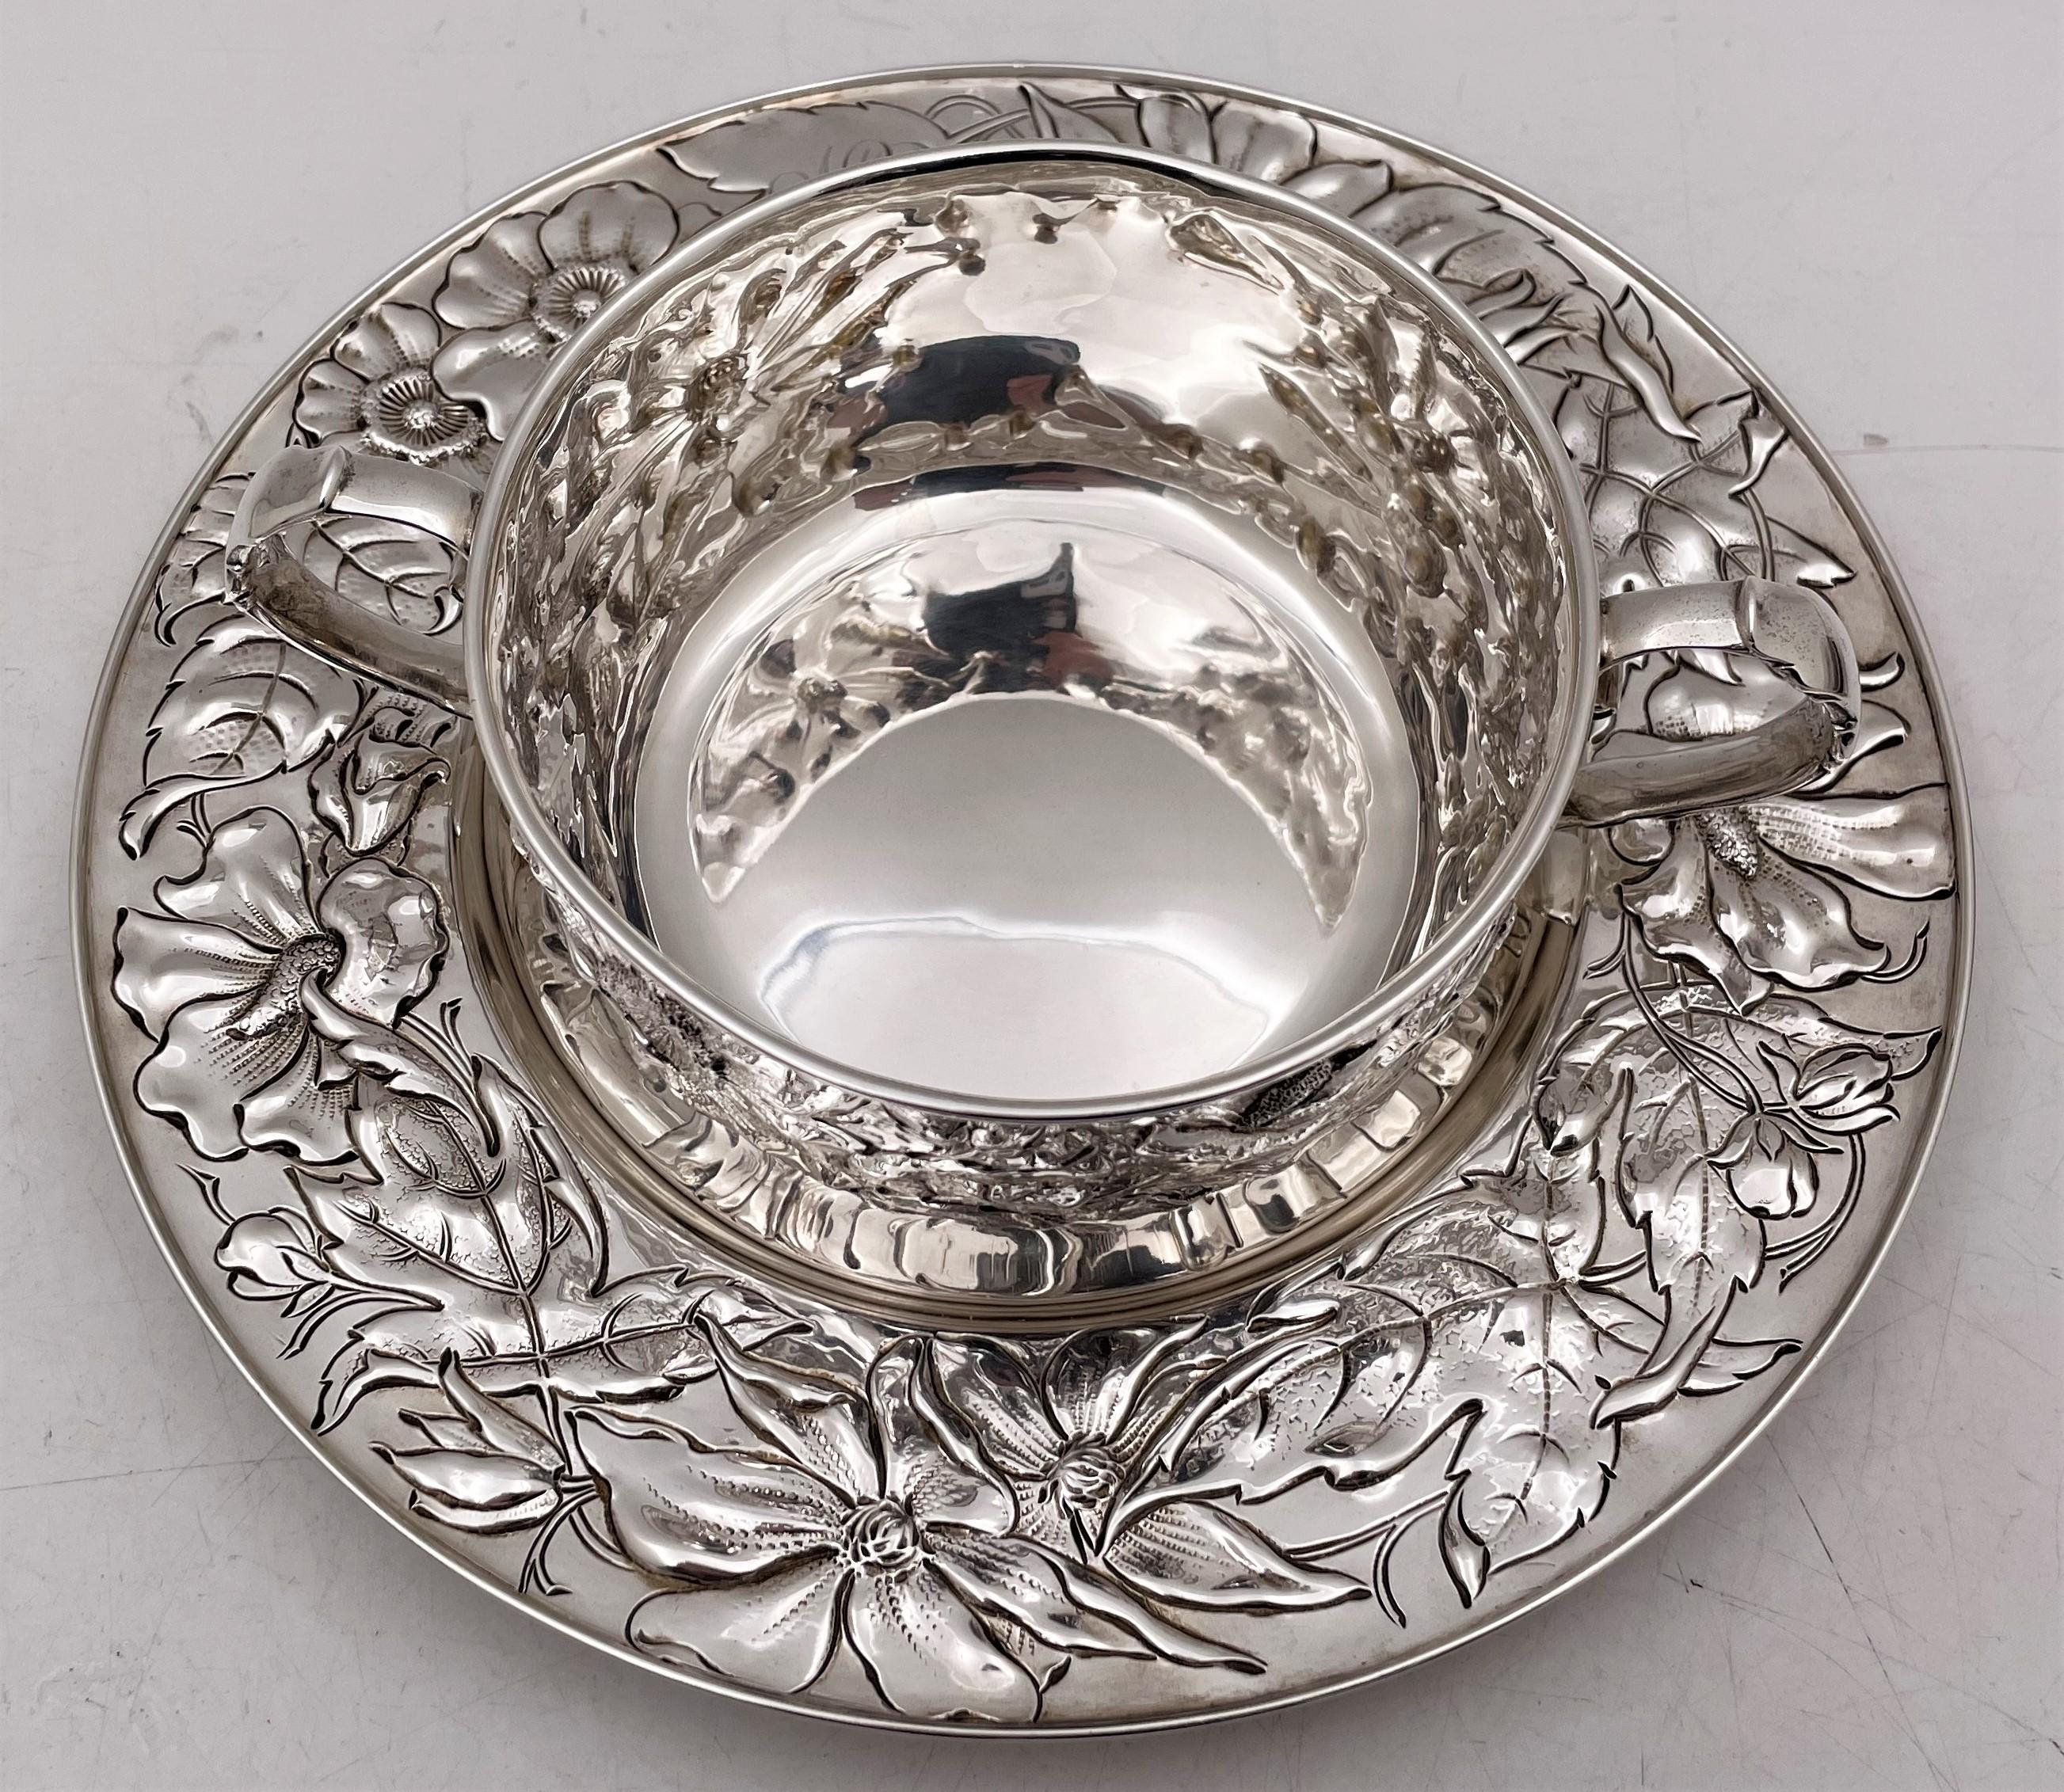 Gorham sterling silver mug and underplate from 1900, in Art Nouveau style. The style, with exquisite, flowing floral motifs, and craftsmanship are reminiscent of the great Martele line. The mug measures 6 1/2'' from handle to handle by 2 1/4'' in